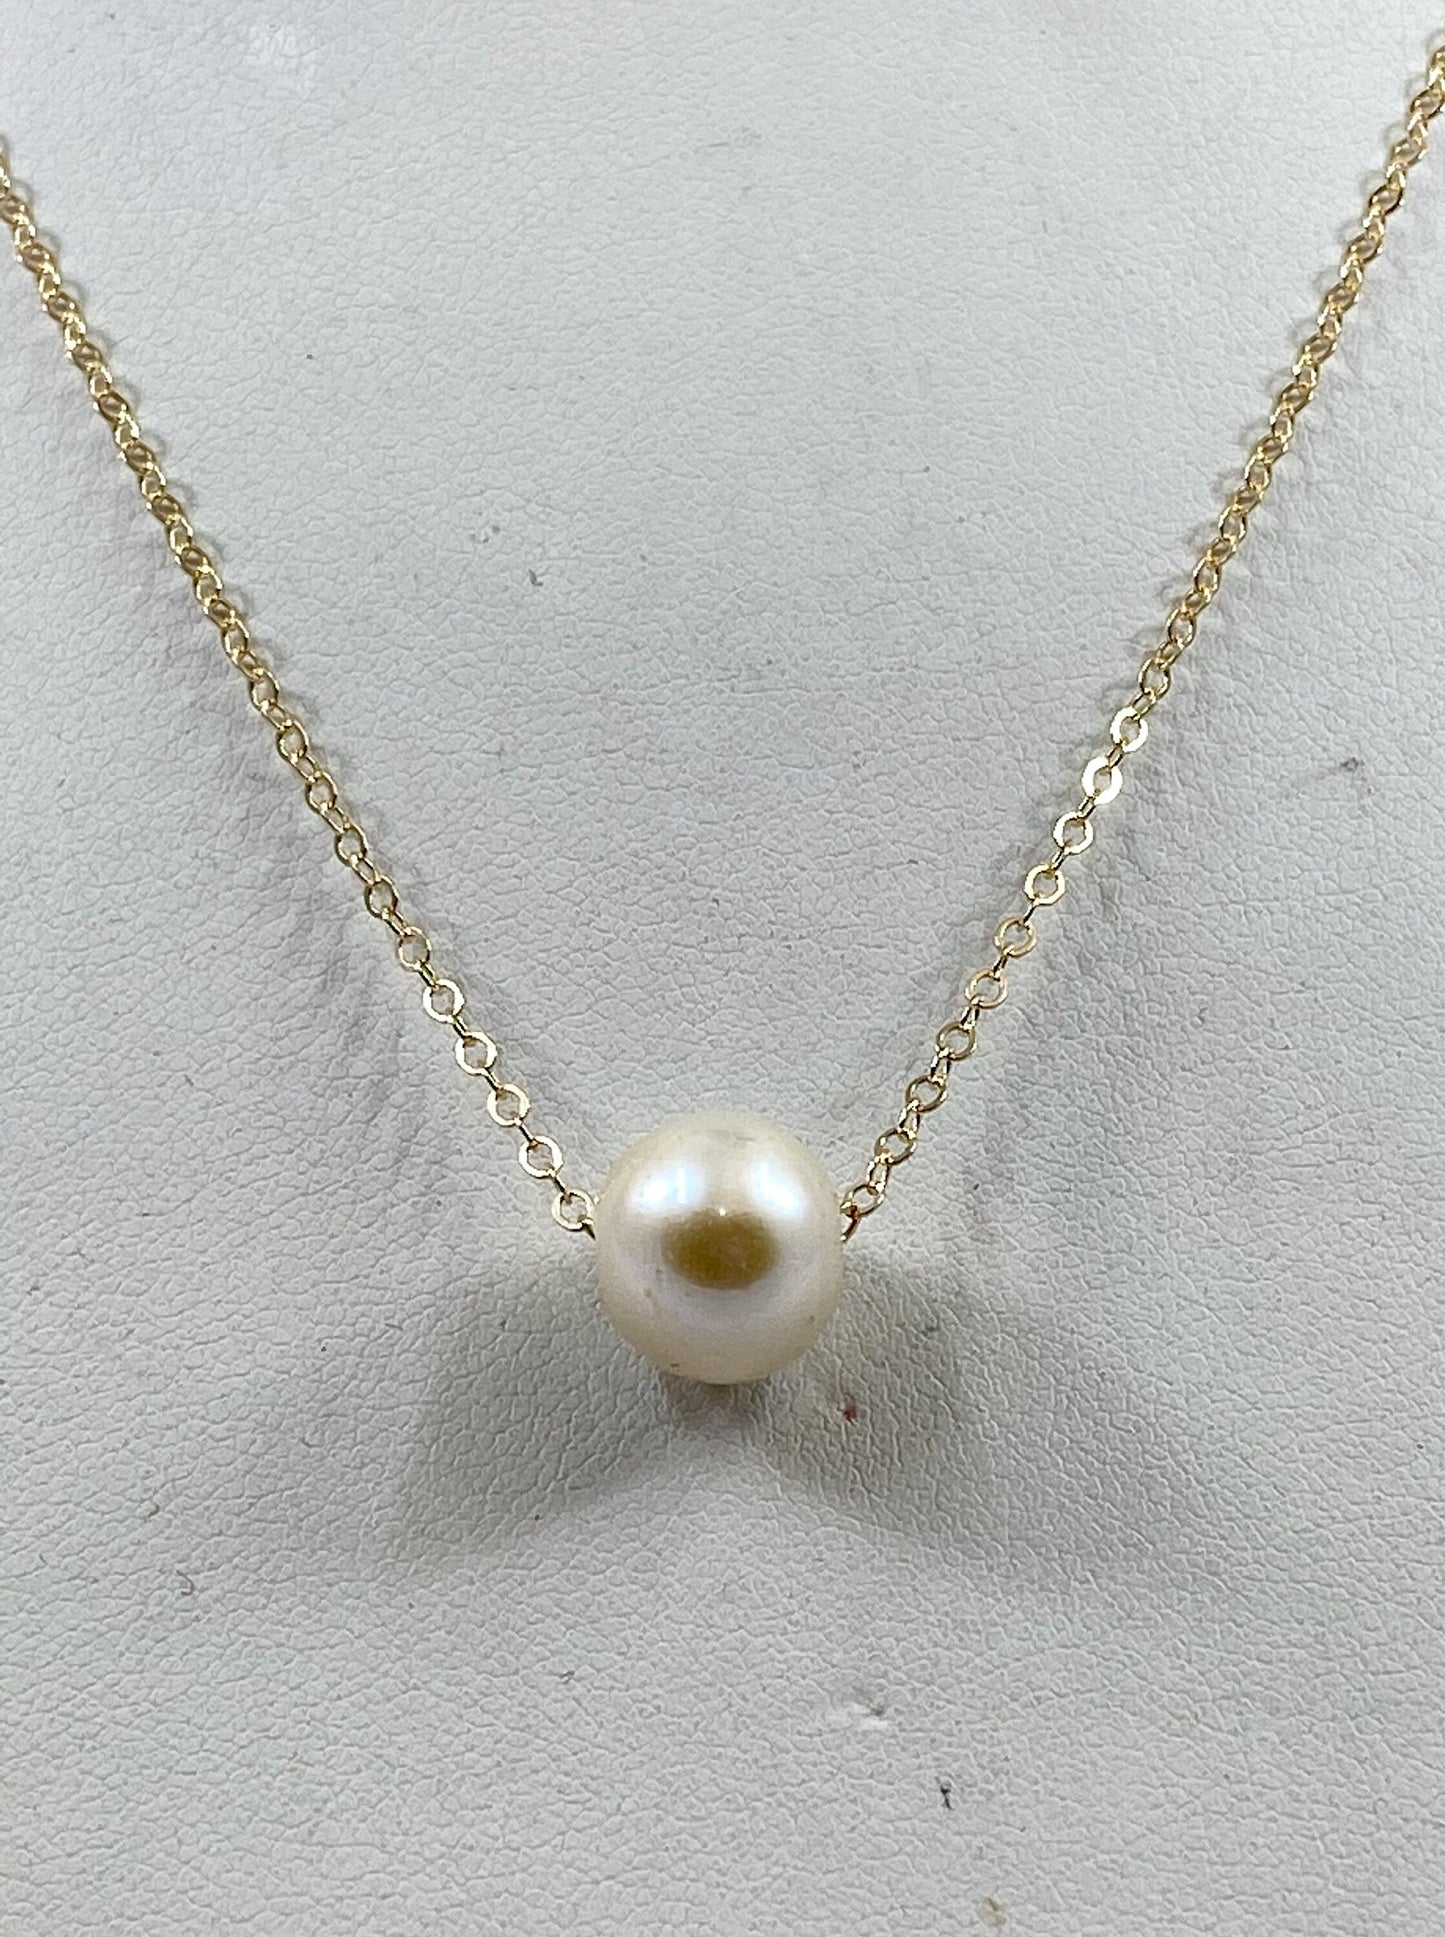 Pearl necklace. This single smooth white pearl slides freely on this lovely quality 14k gold filled chain.